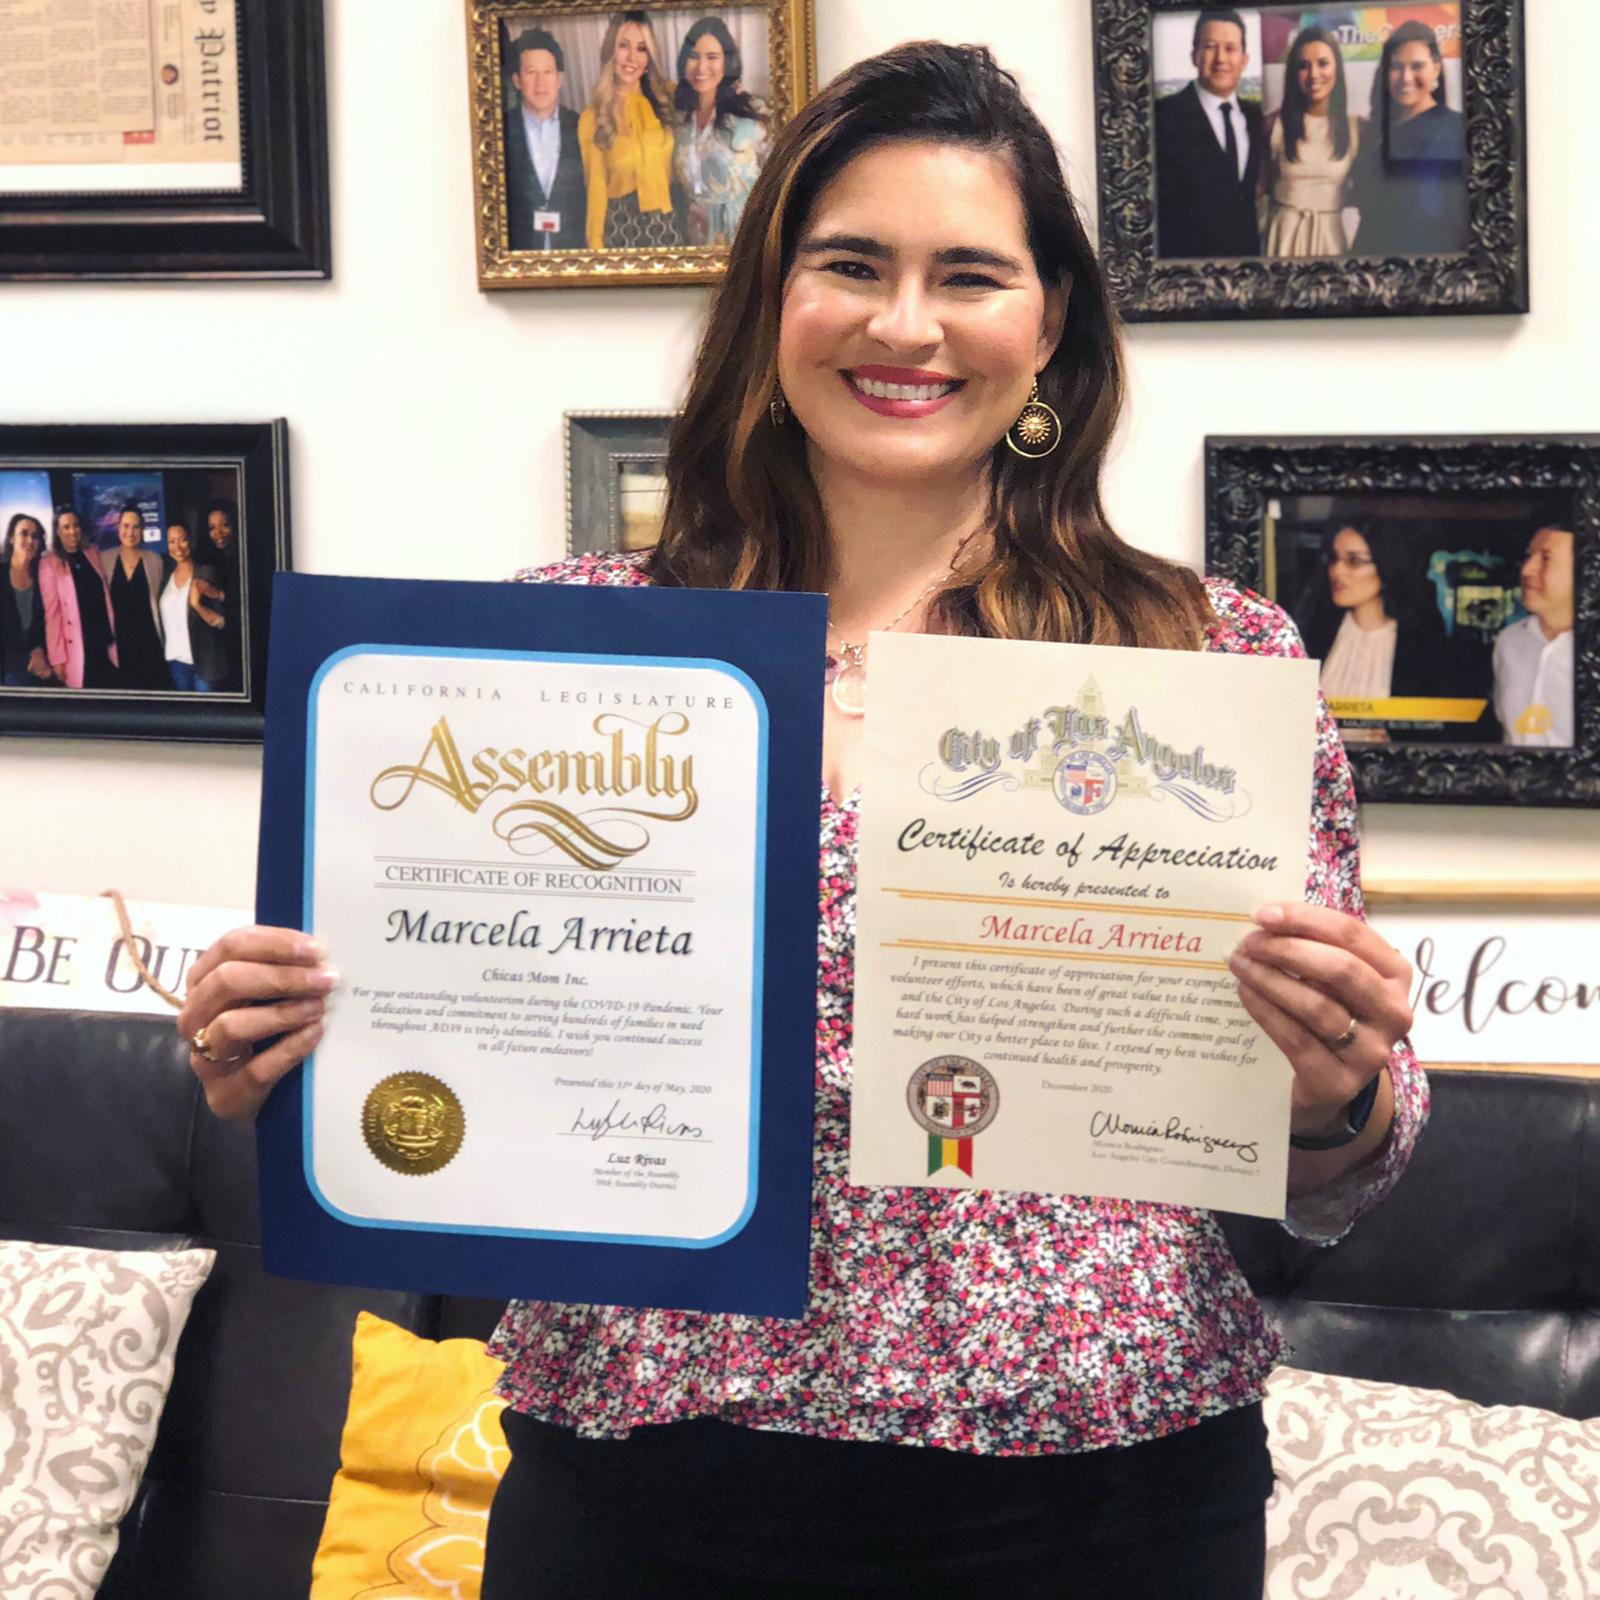 Marcela Arrieta receives recognitions from the city of Los Angeles for her volunteer work during the Covid-19 pandemic